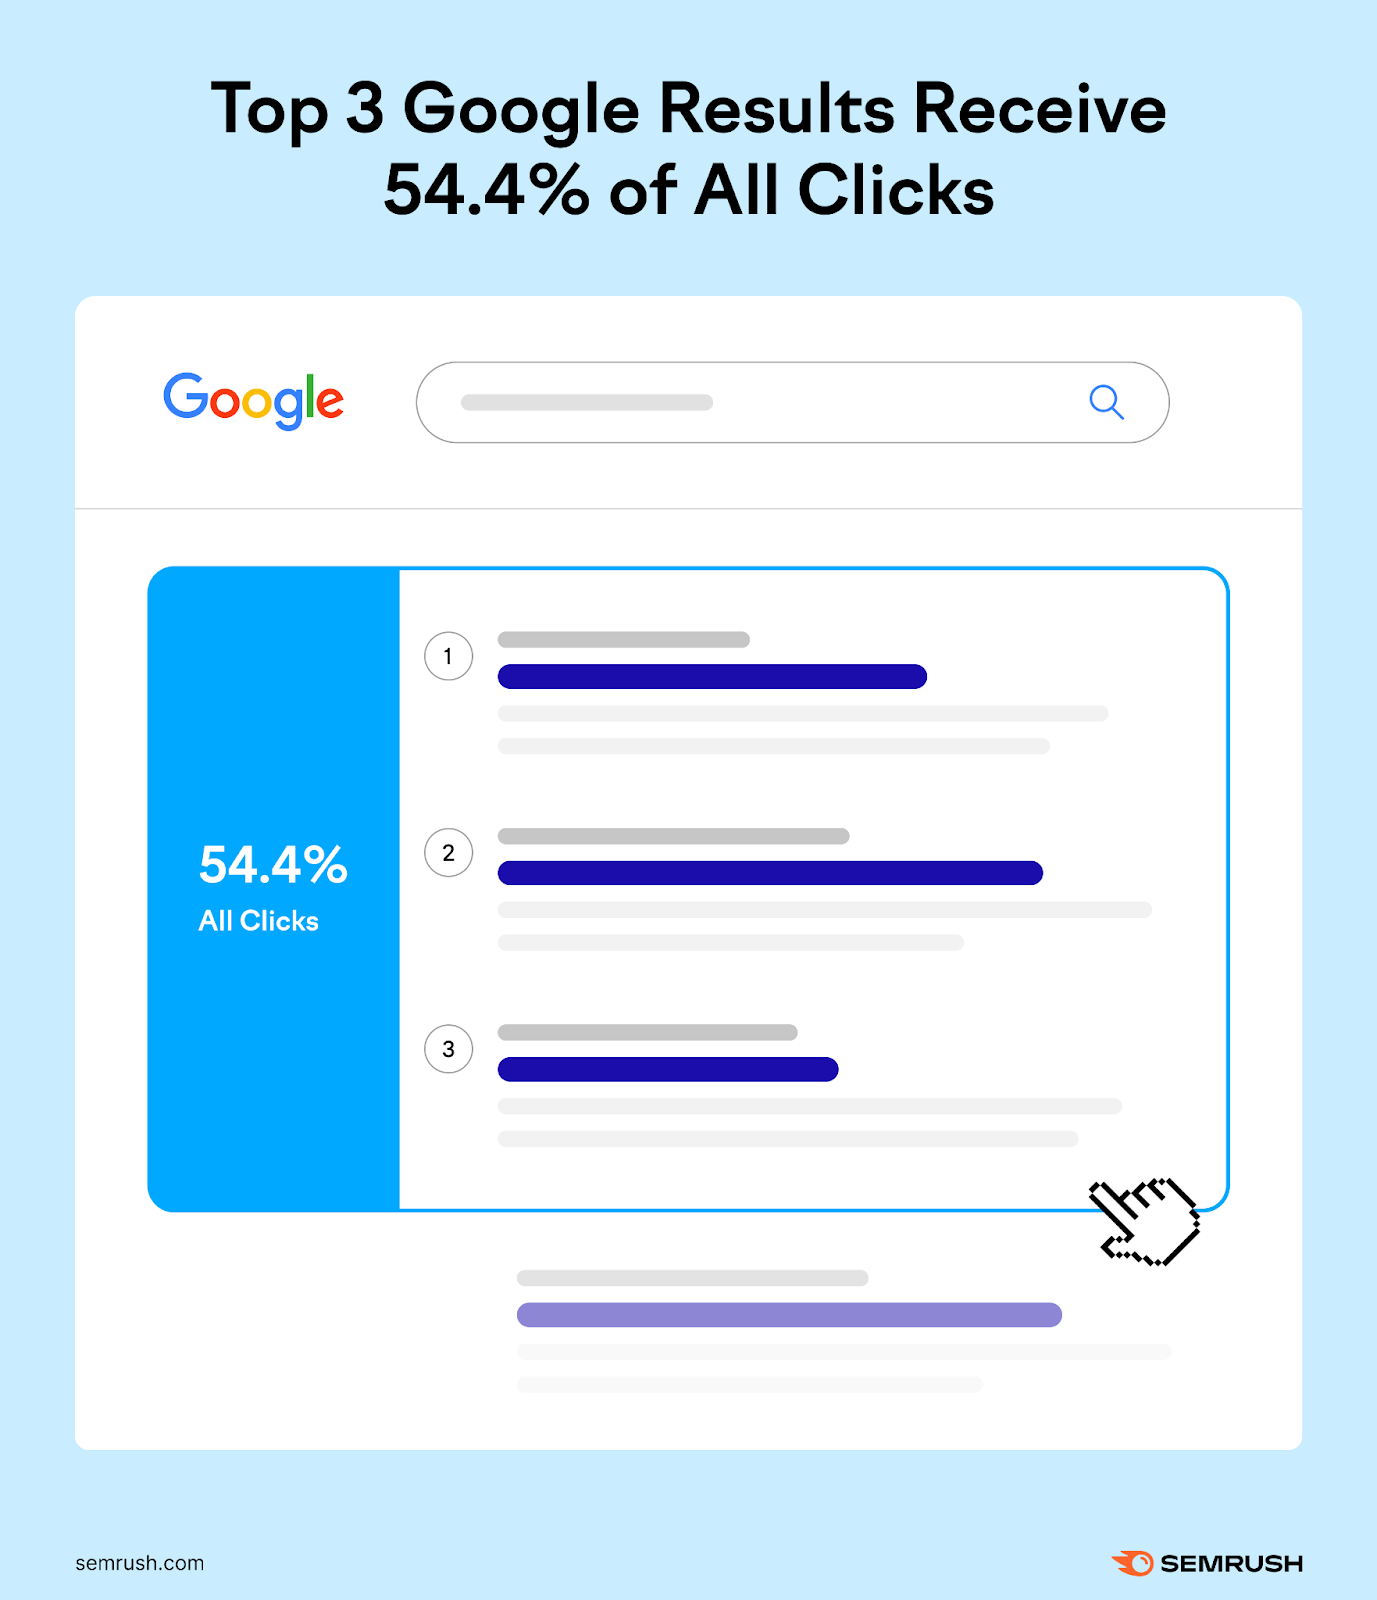 Backlinko survey  recovered  that the apical  3  google results person   54.4% of each  clicks.